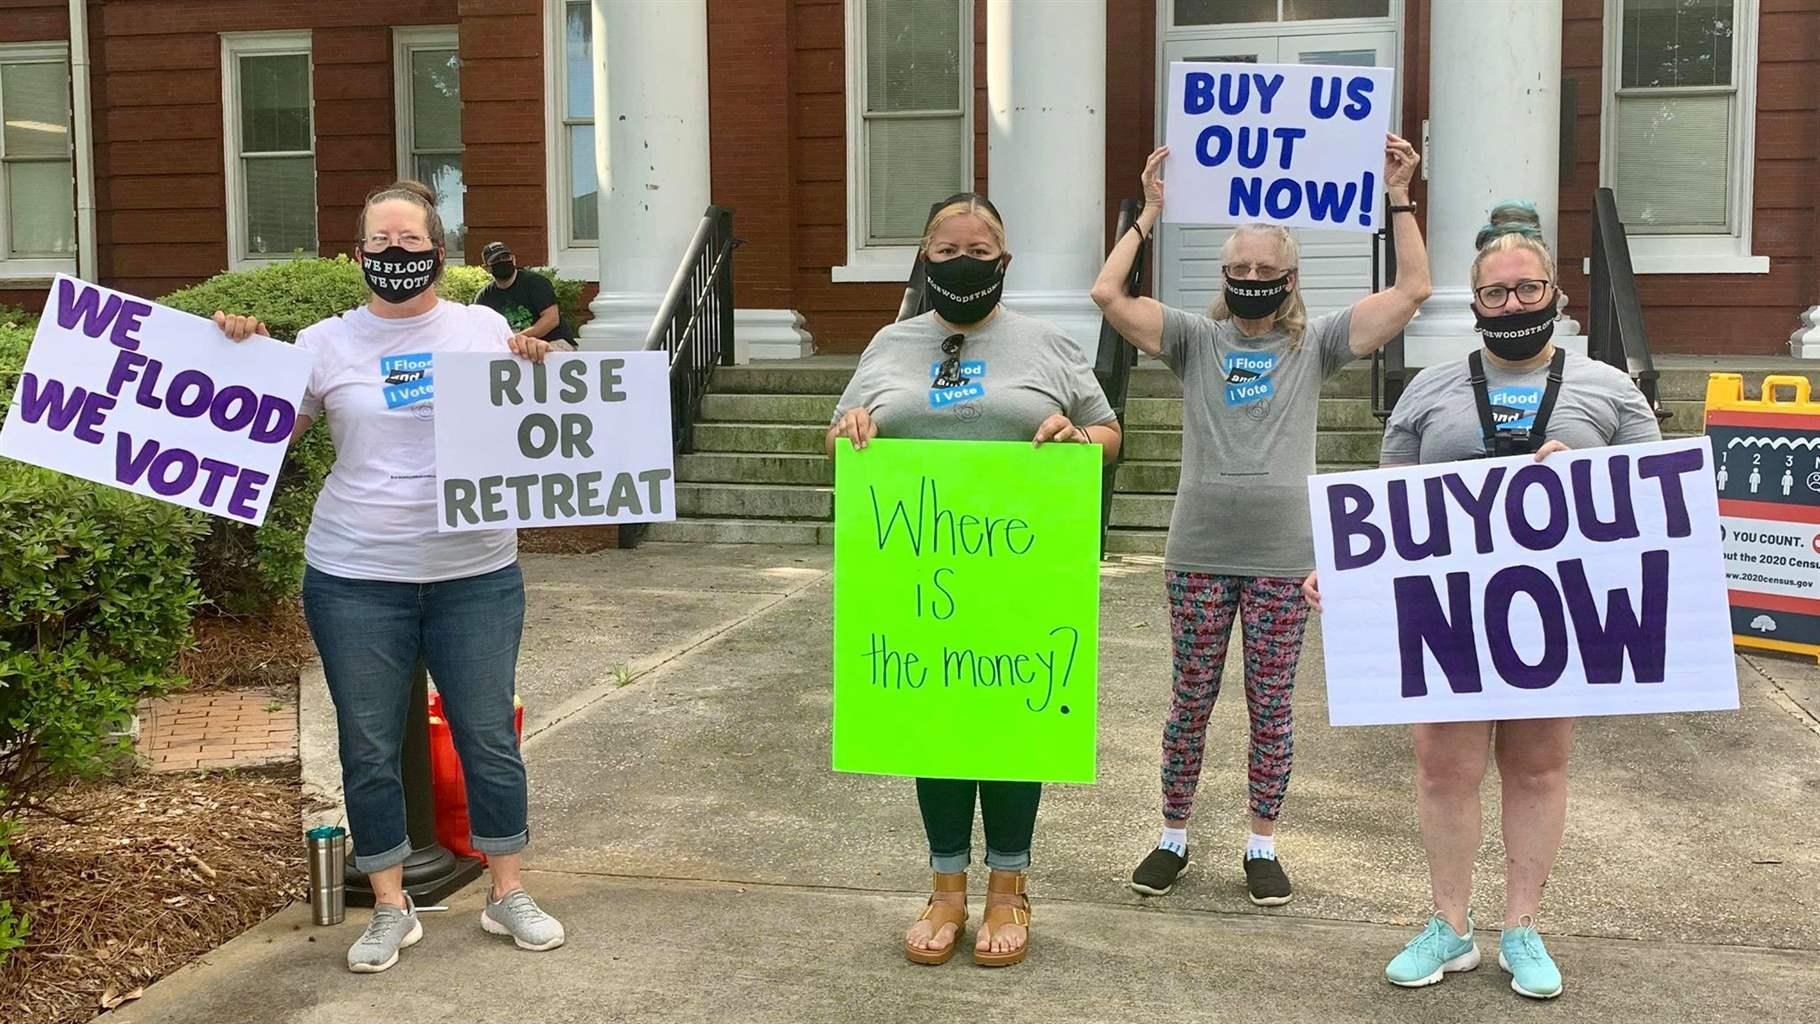 In July 2020, Straka (left) and Rosewood Strong co-founder Melissa Krupa (far right) demonstrated with fellow group members (center, left to right) Vivian Vega and Darlene Demi outside the Horry County Court House in support of a buyout program for flood victims. The protest was widely covered by local media.